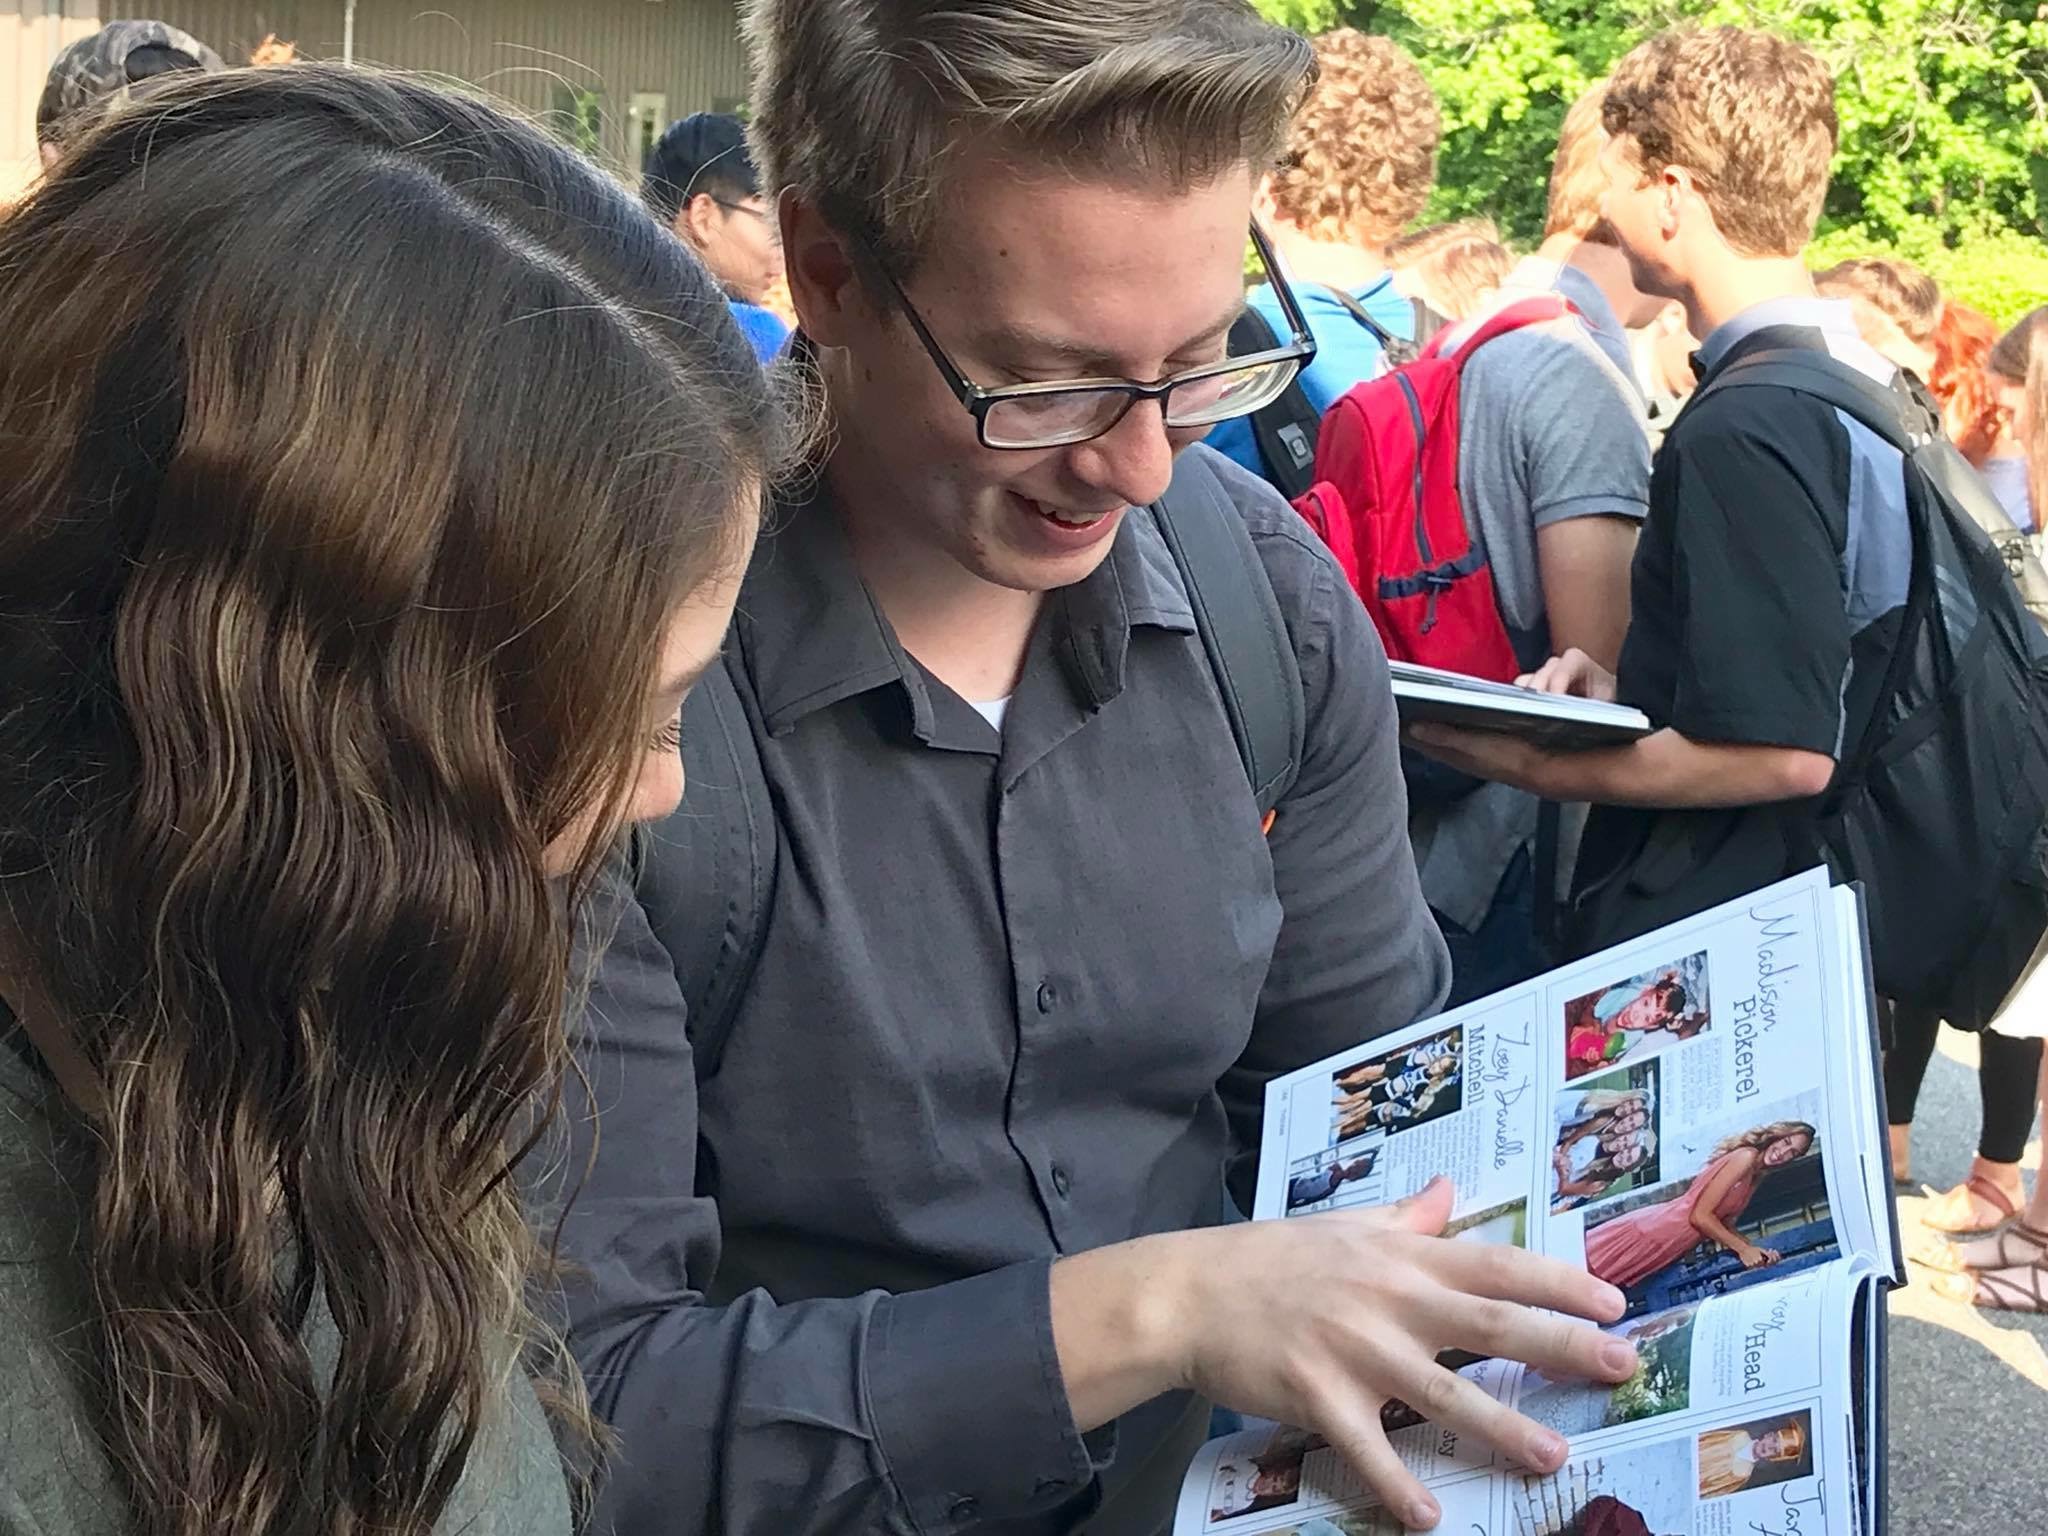 Two people lean their heads over the open pages of a yearbook.